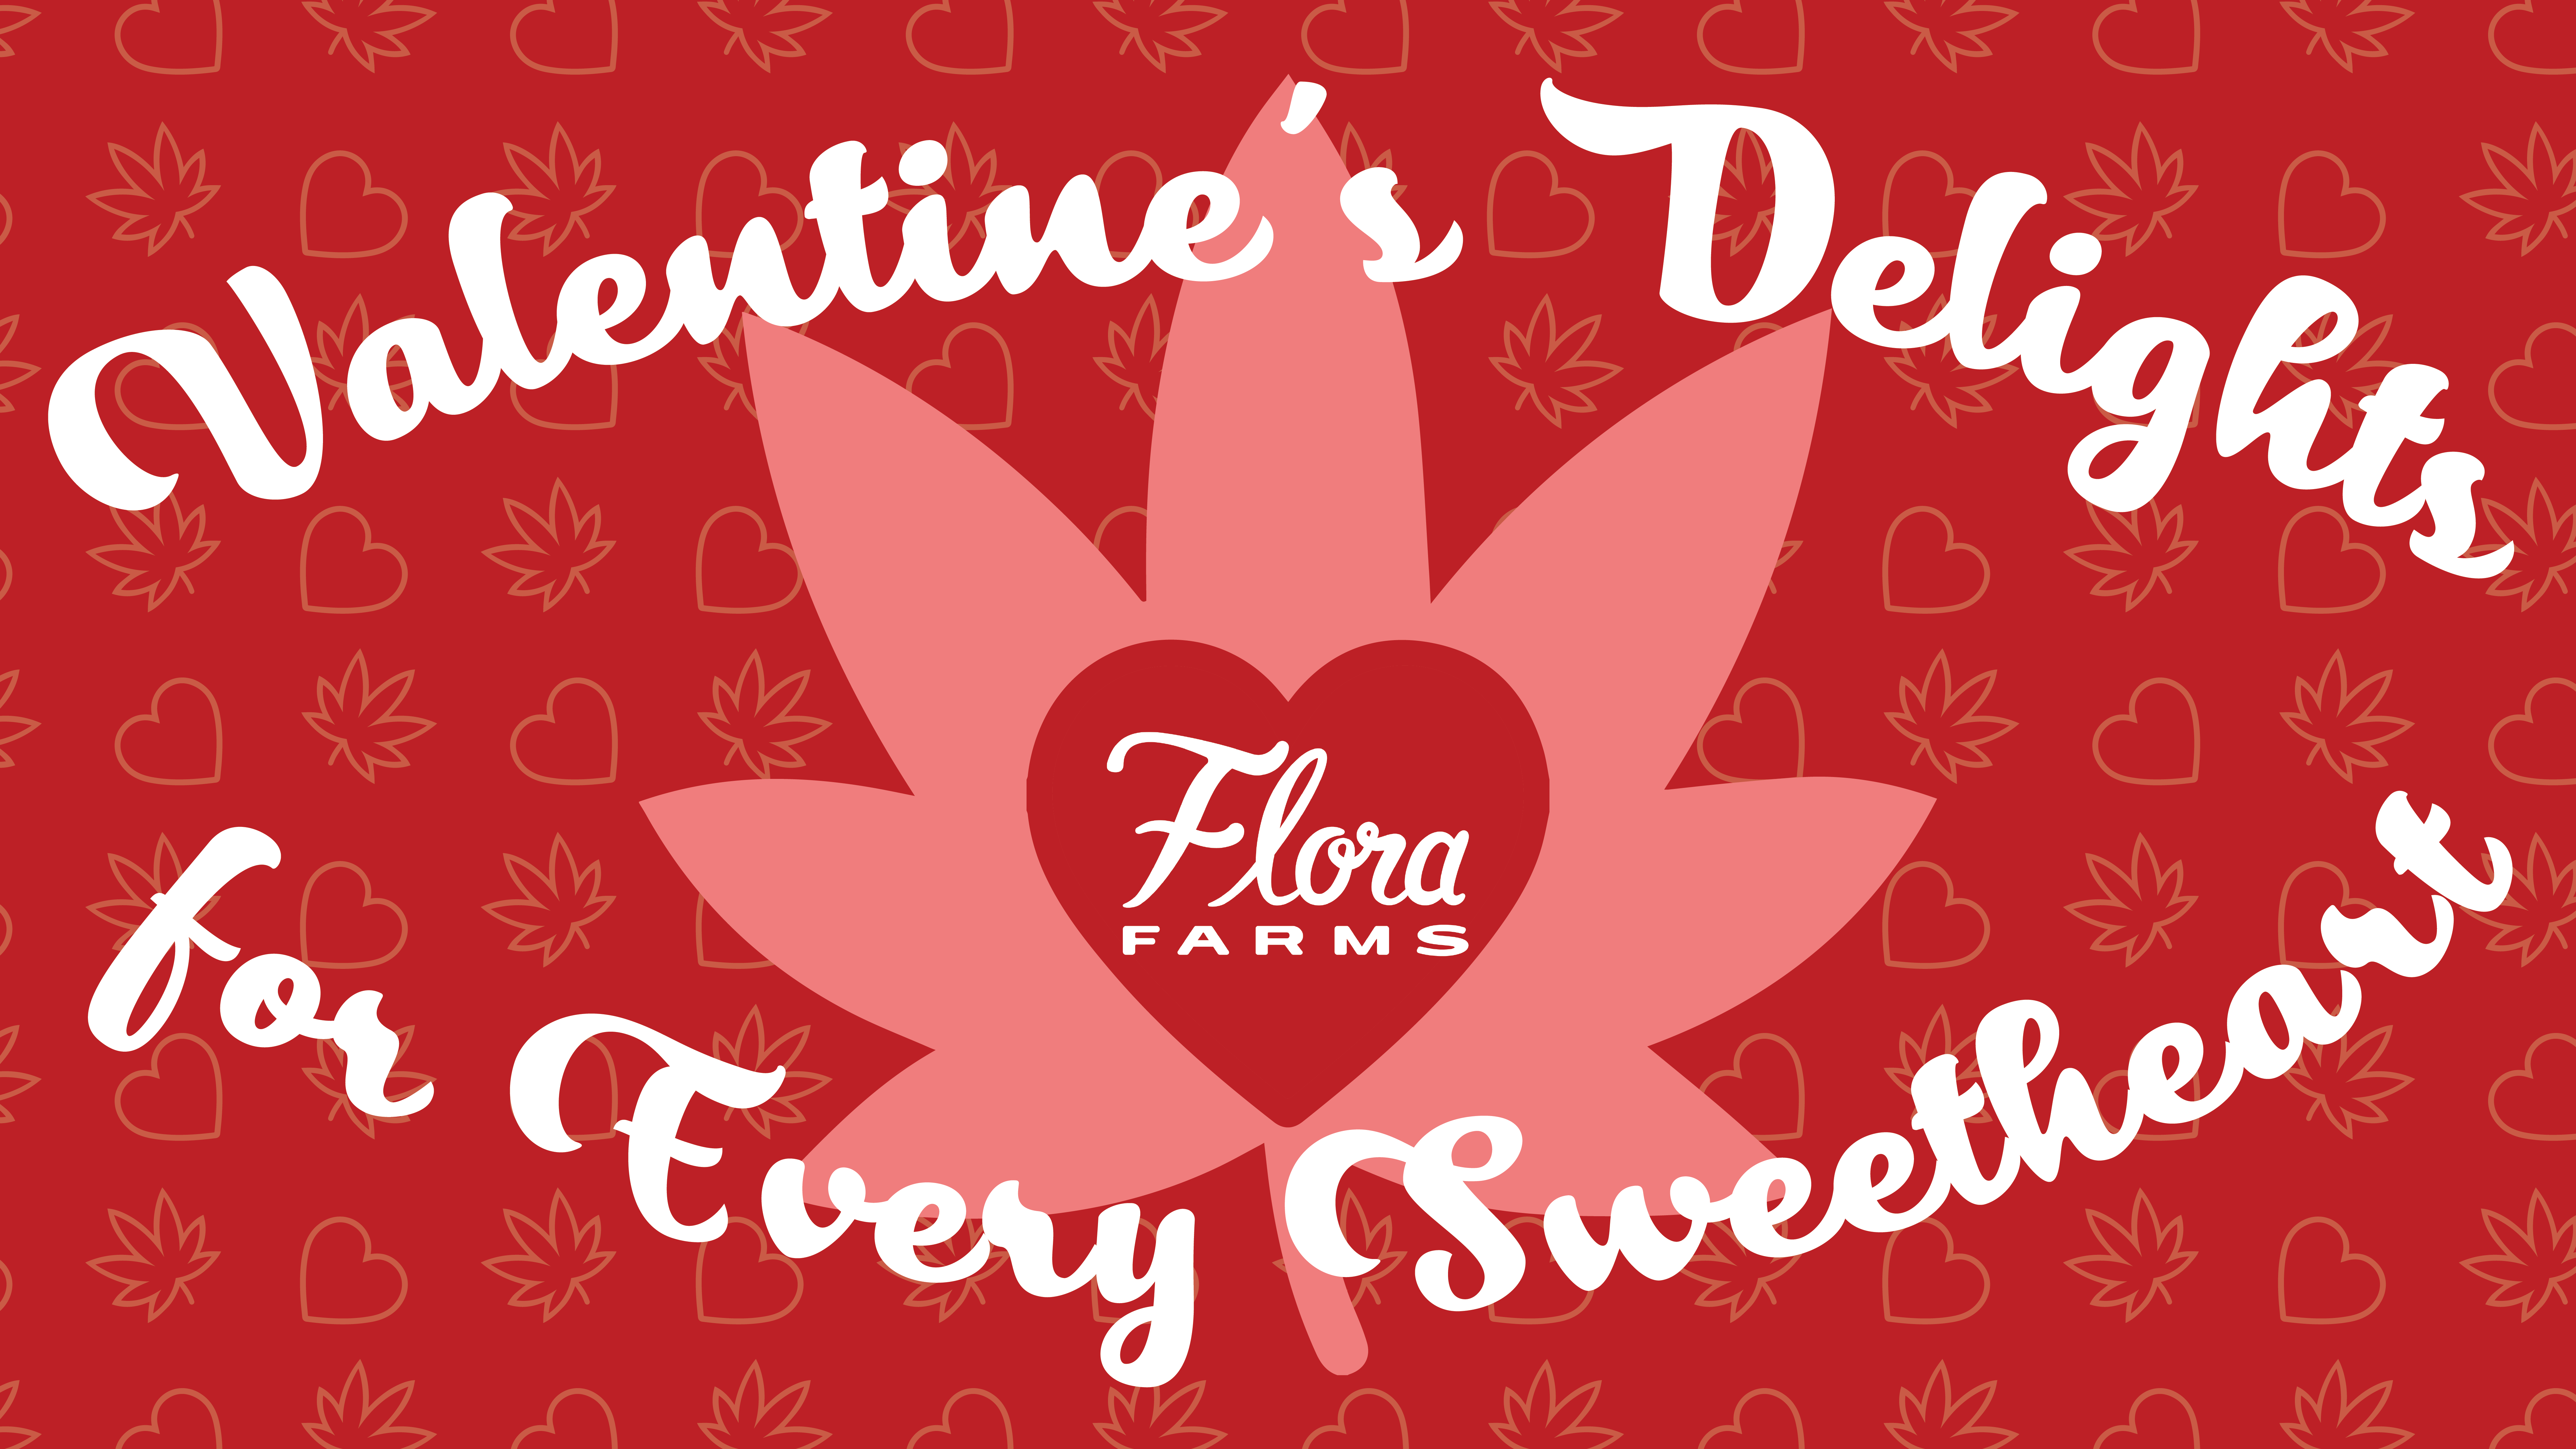 Valentine's Delights for Every Sweetheart - a pink weed leaf graphic with a red heart in the center highlights the Flora Farms logo at the center of the image